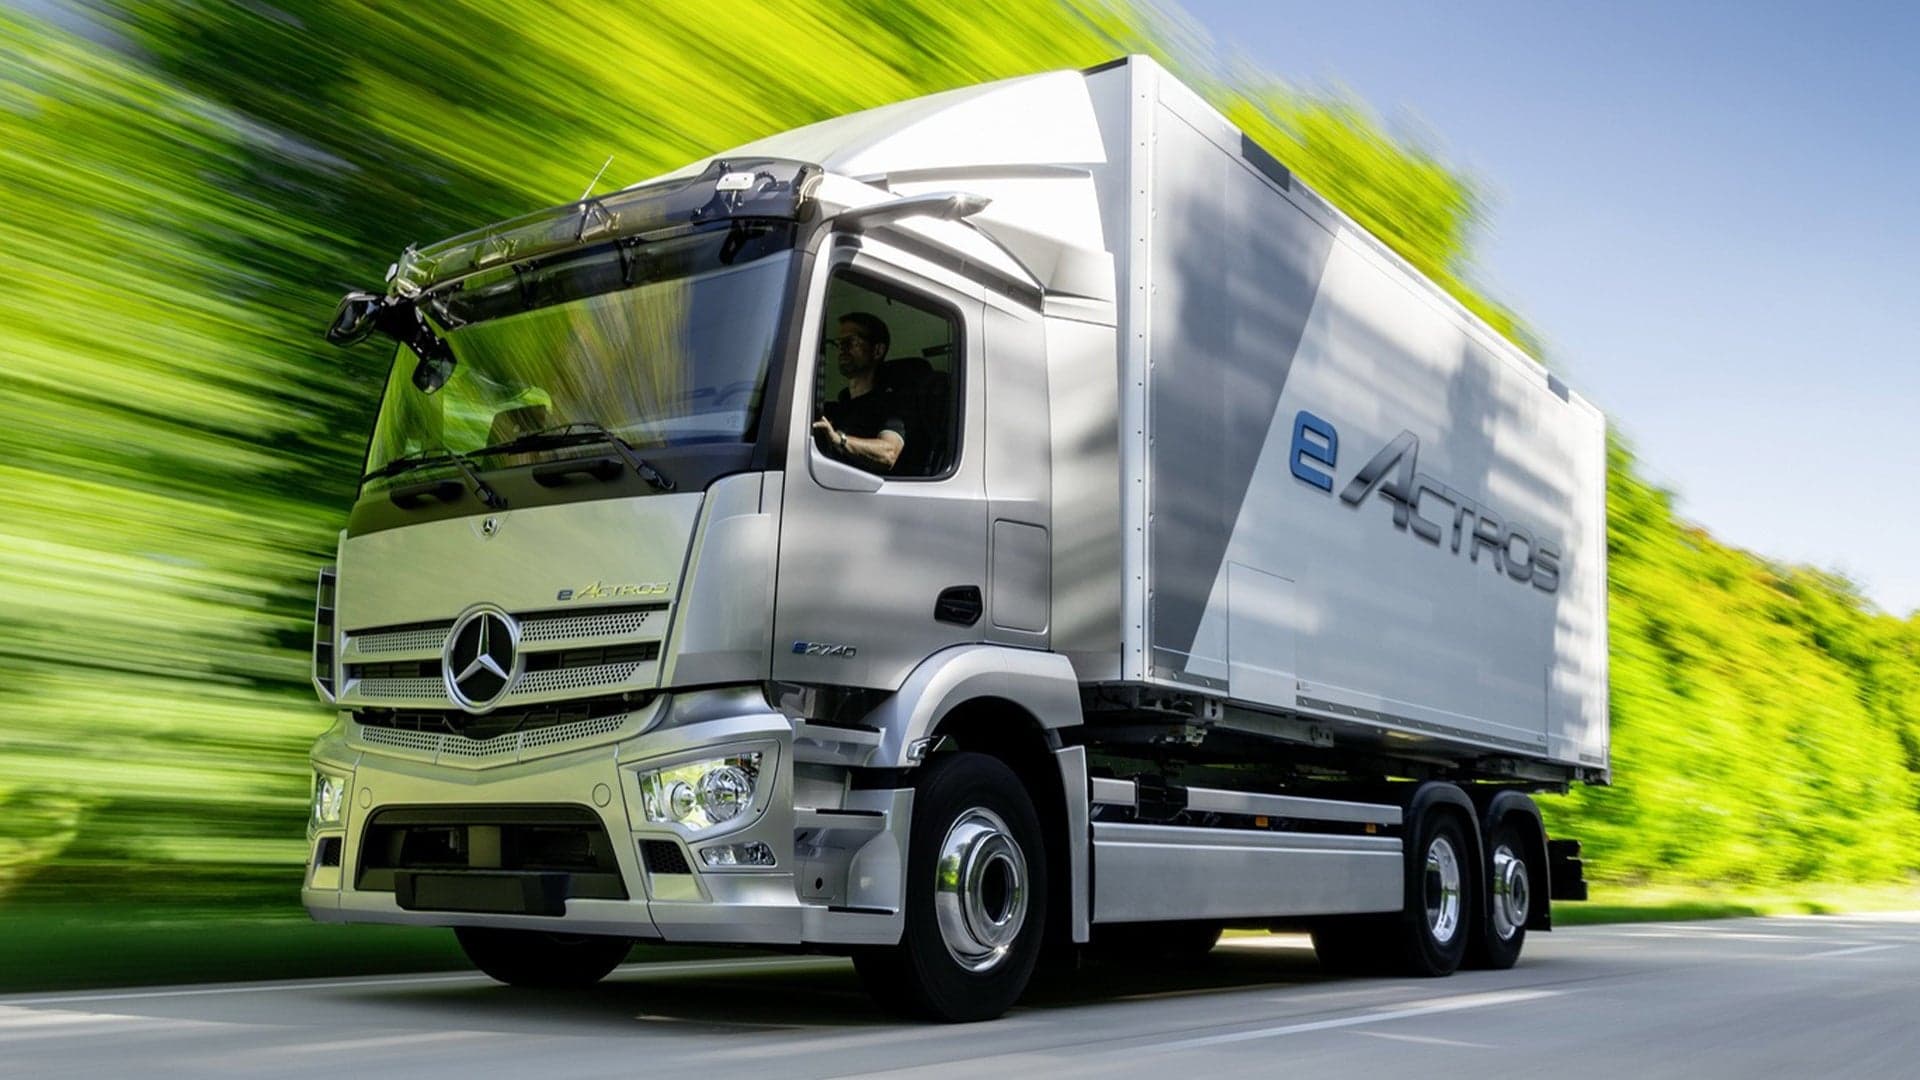 Mercedes’ Electric Big Rig With 248-Mile Range Makes Zero-Emission Deliveries a Reality